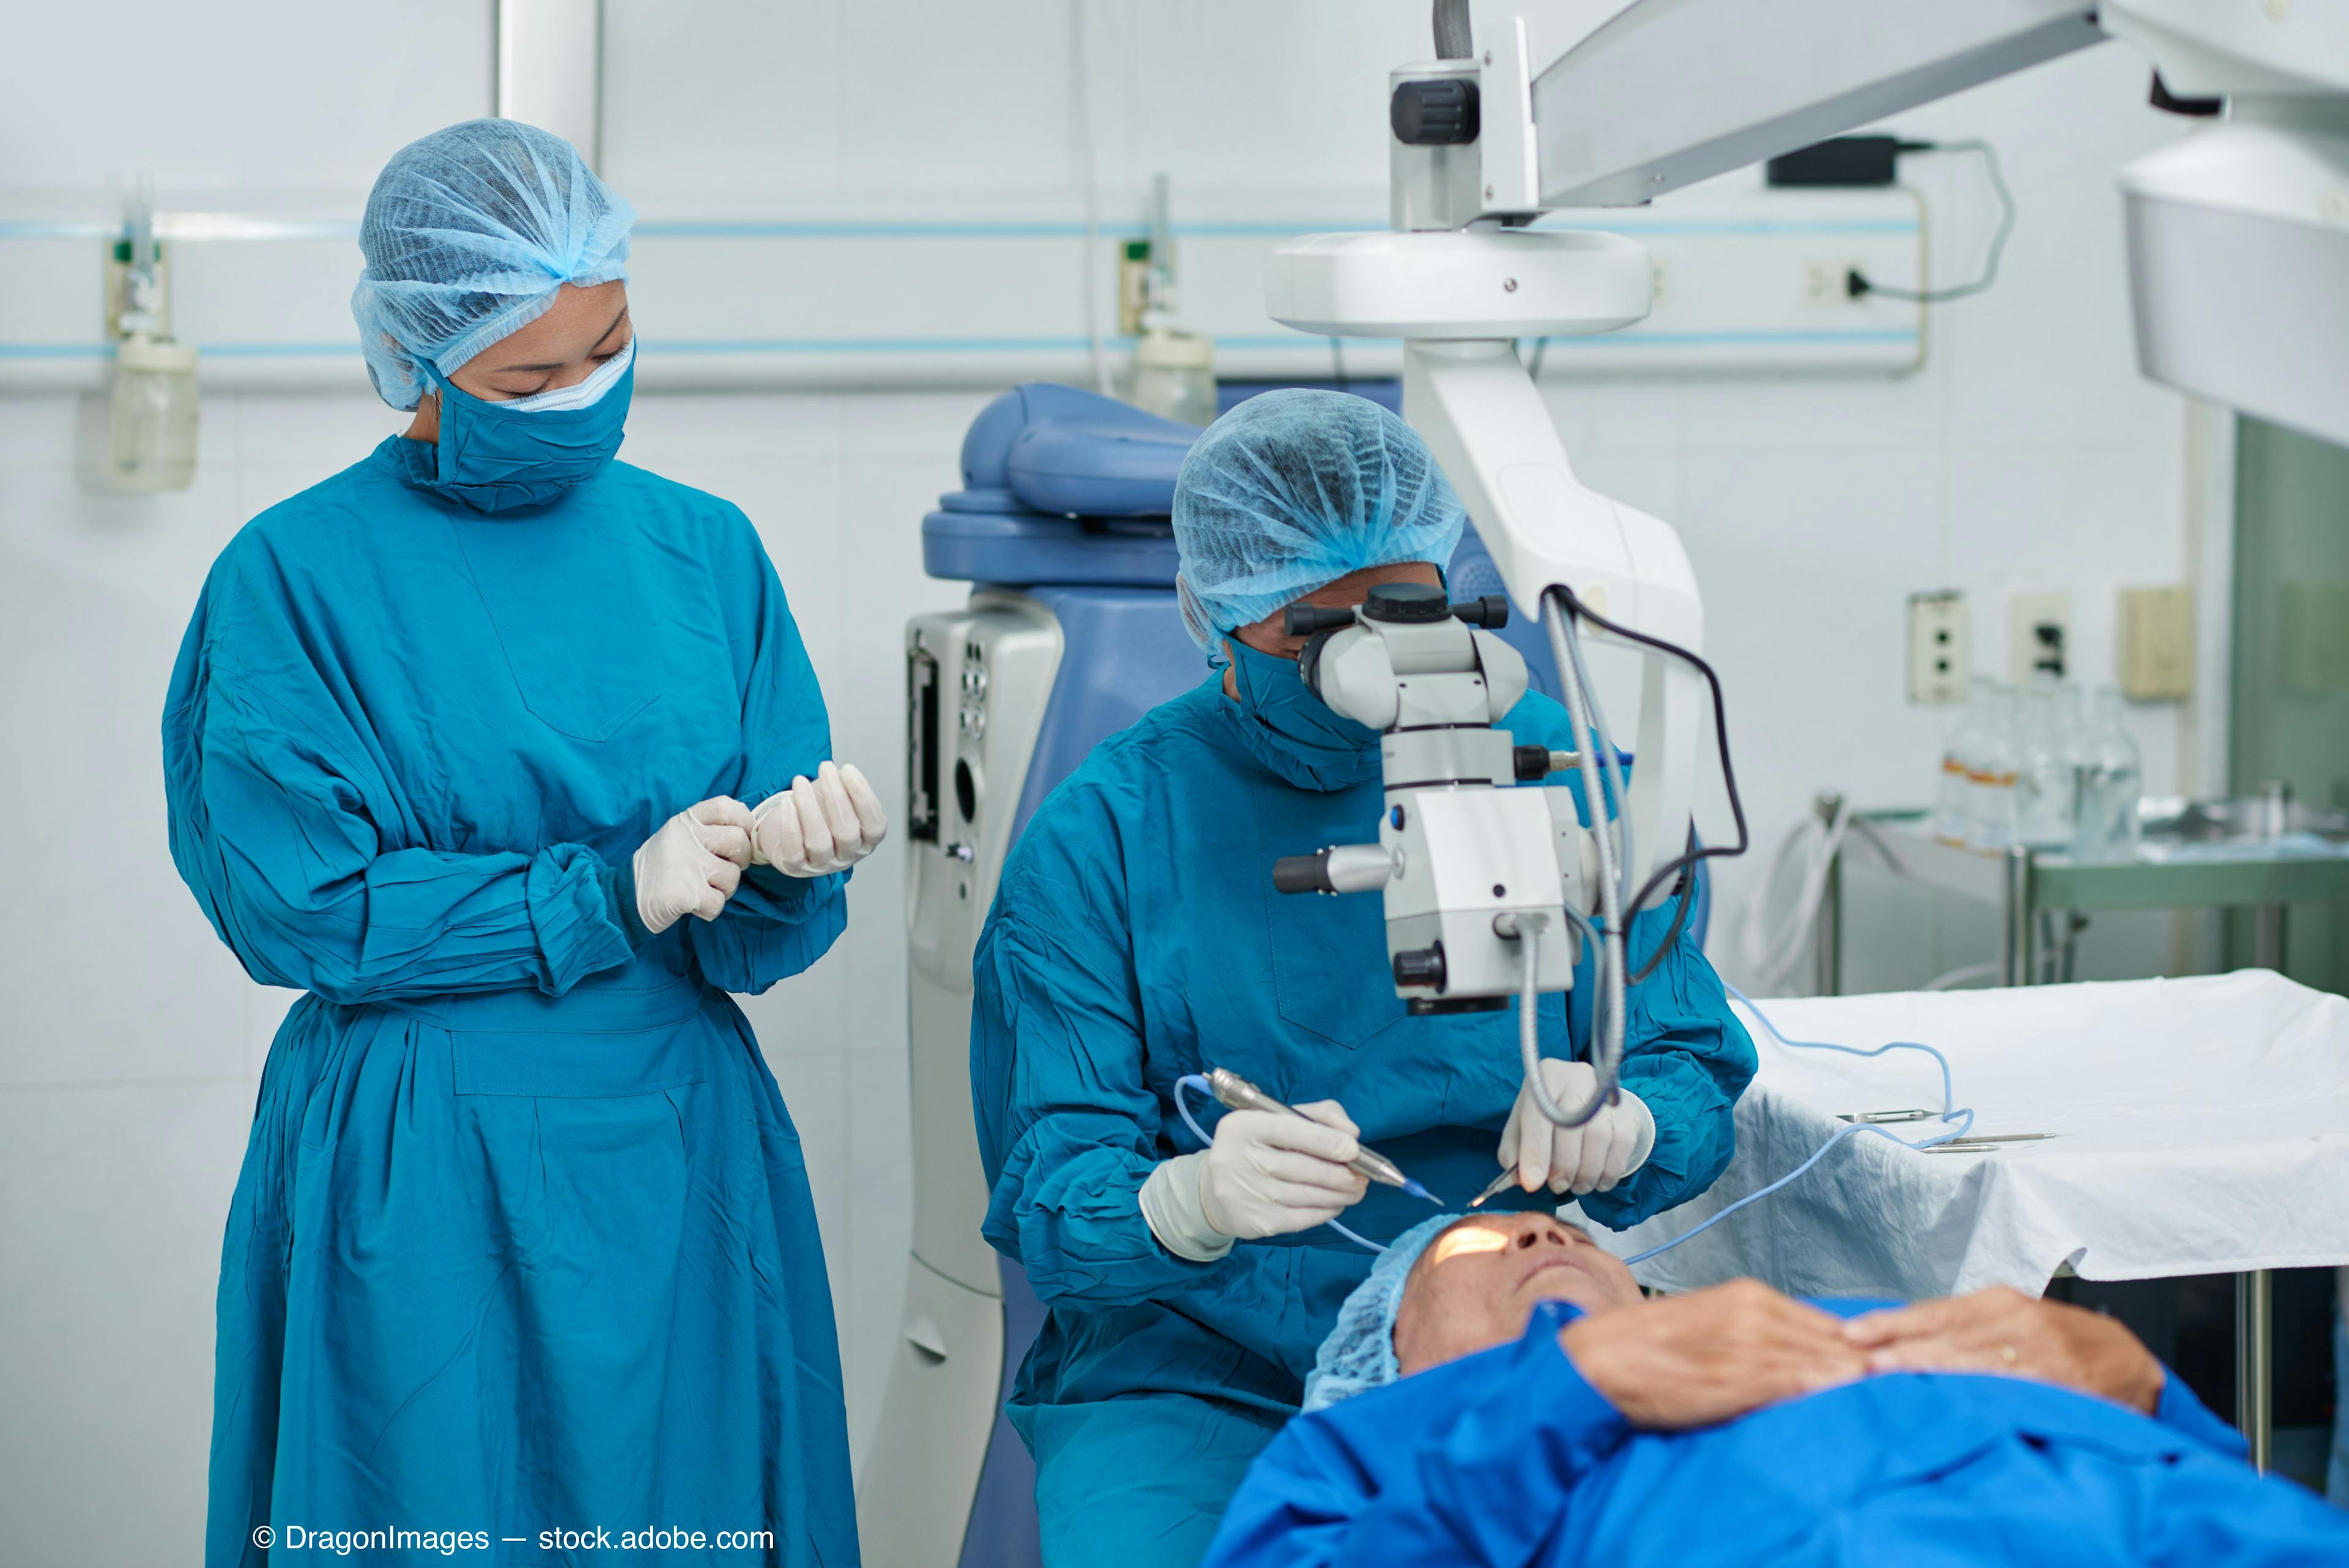 Streamlining the preoperative cataract surgery protocol while maintaining high care standards